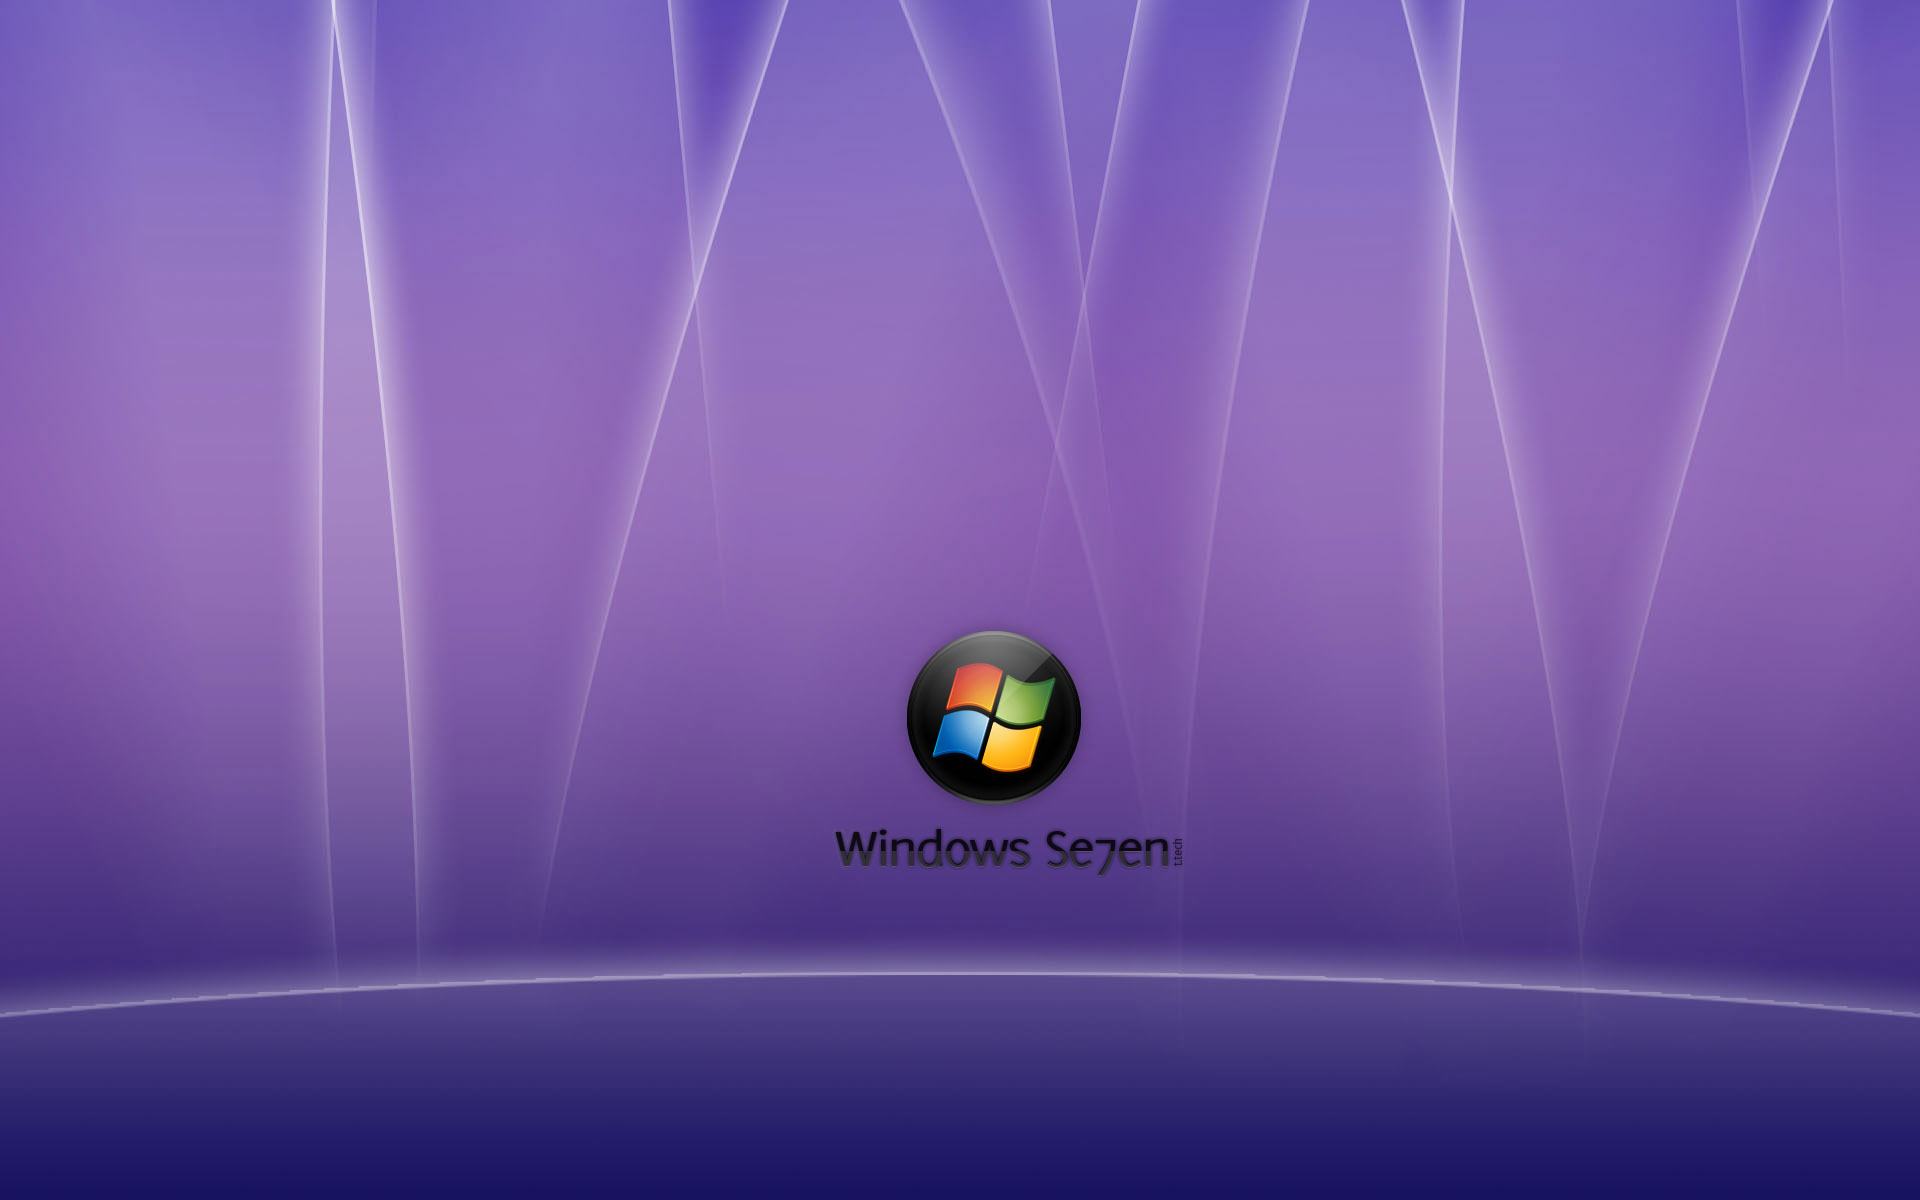 Windows Seven Wallpaper Awesome